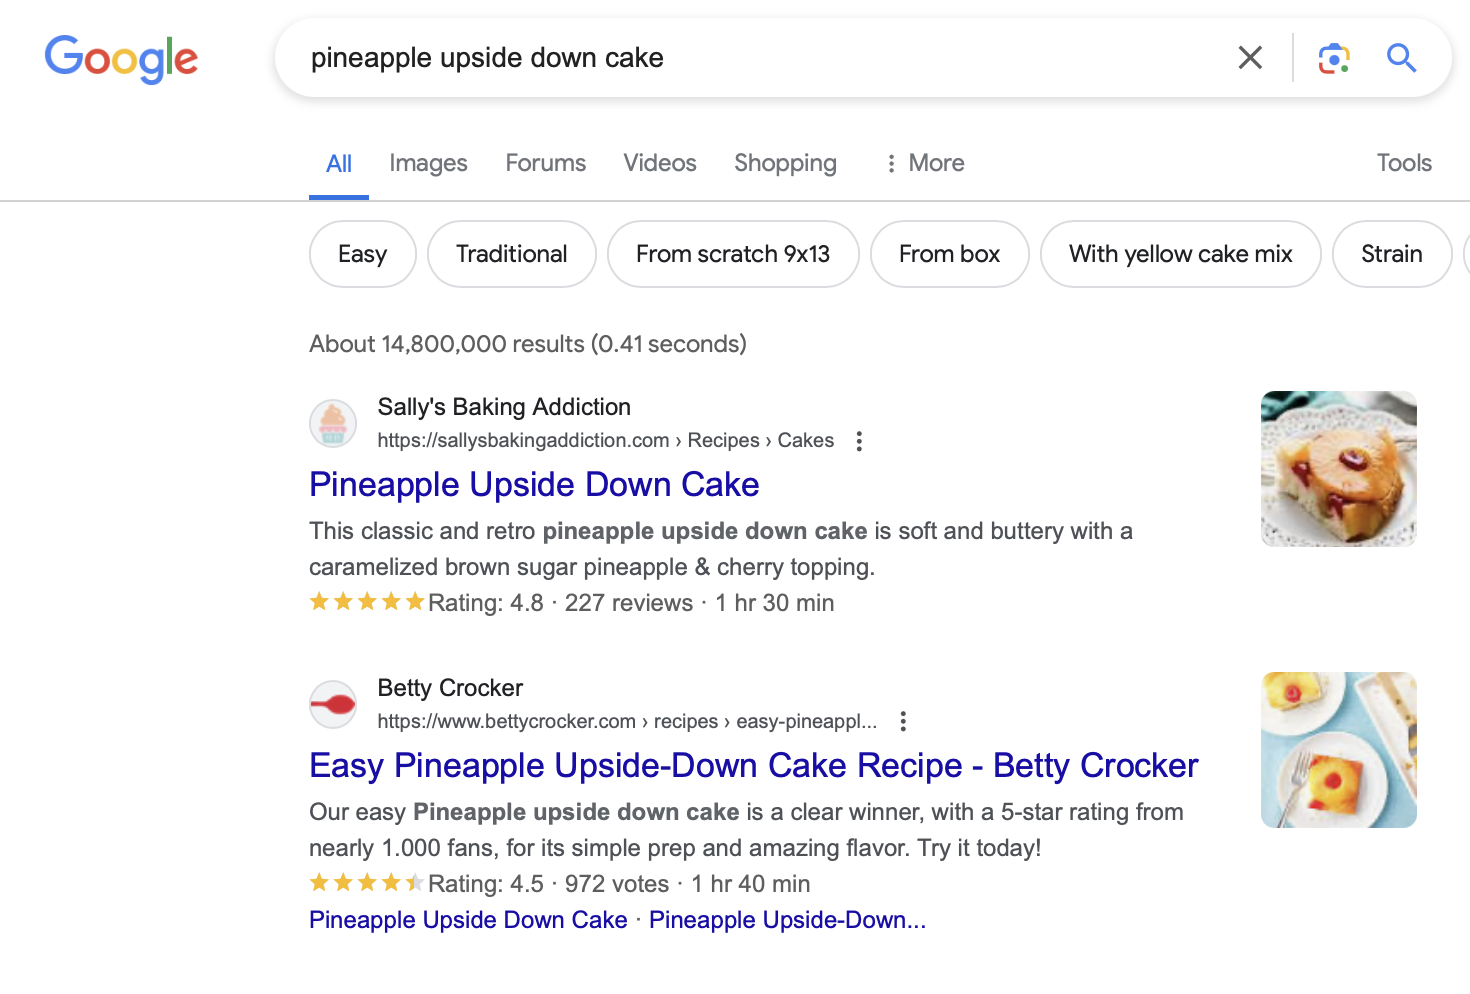 SEO optimized images showing up in a Google search result